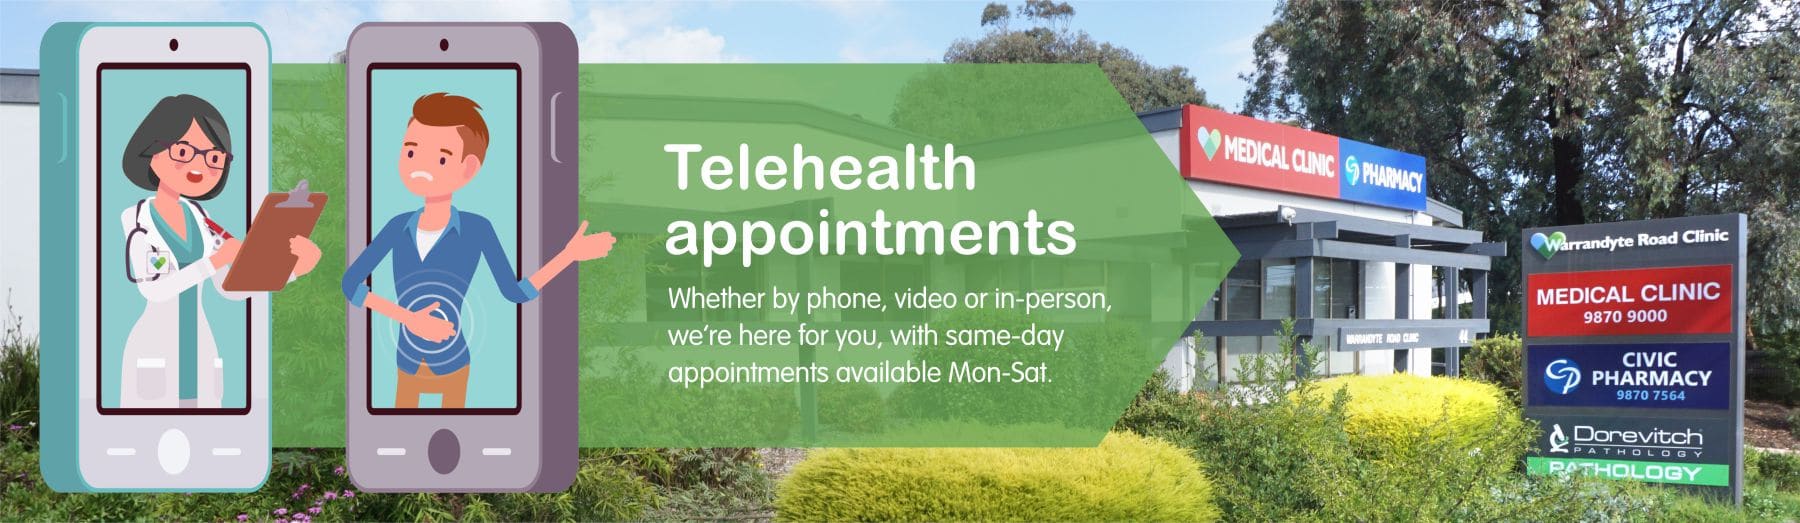 Telehealth appointments